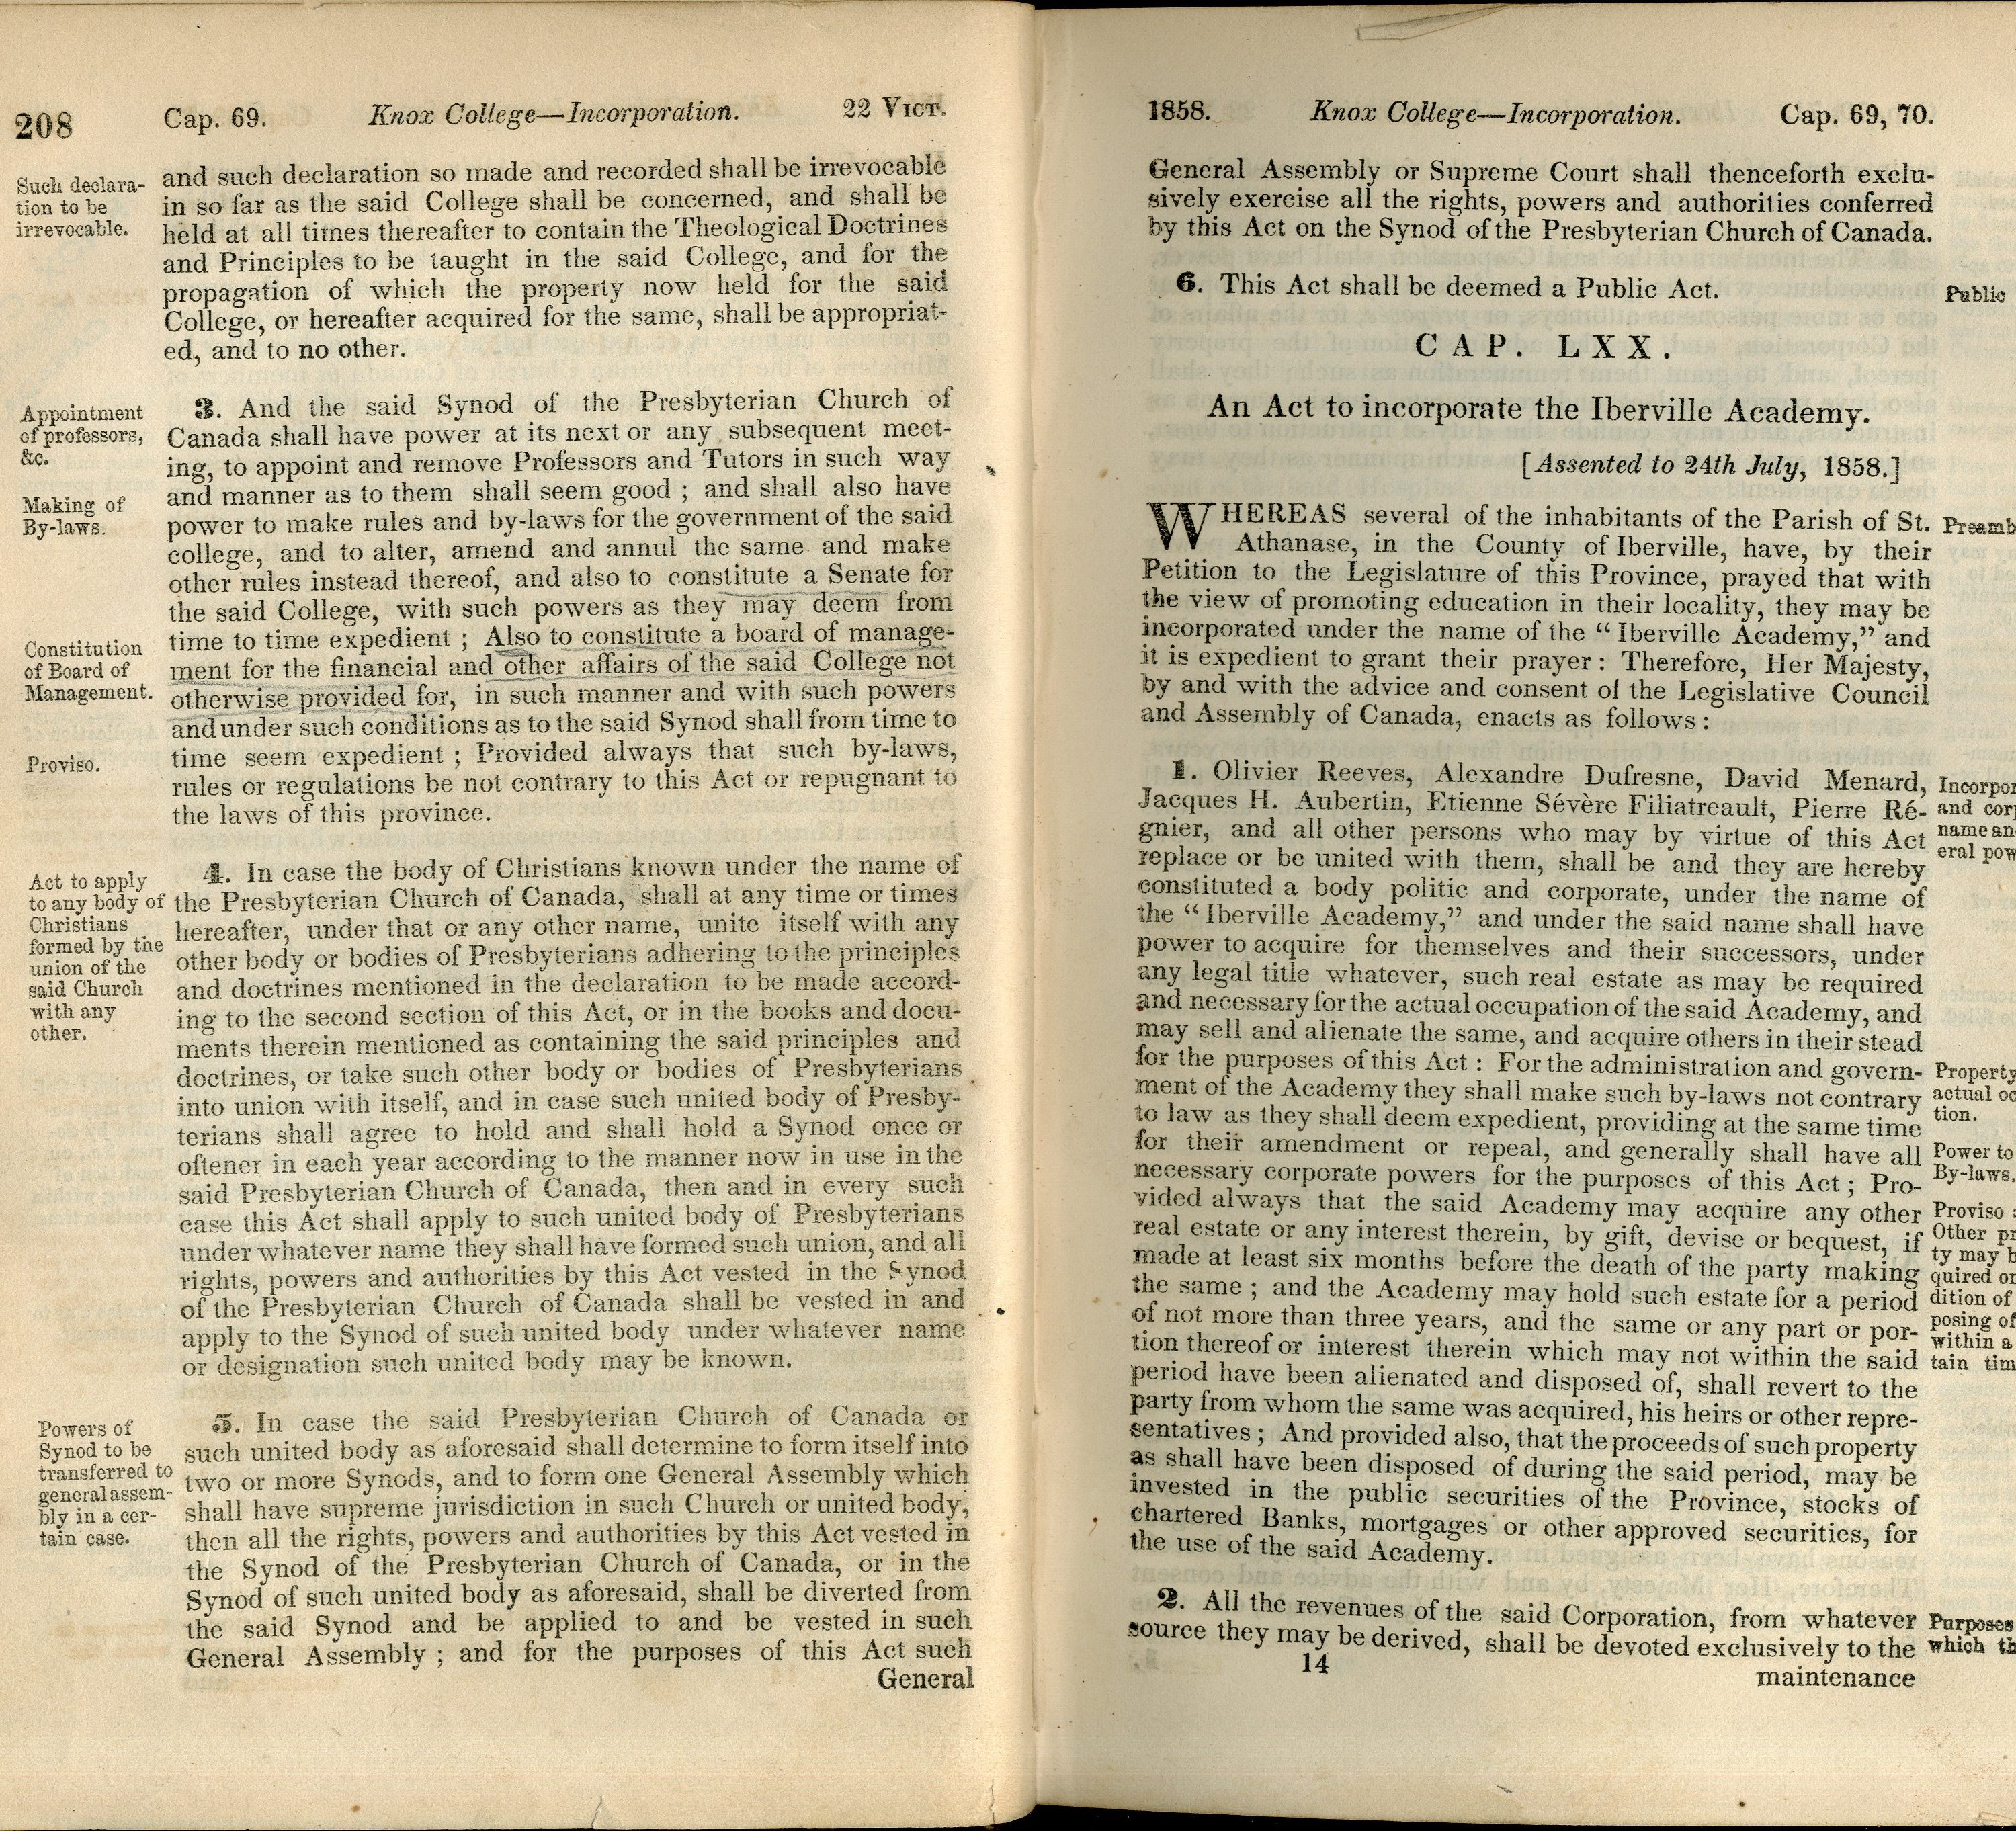 The Act of incorporation, 1858, making the Constitution of Knox legal